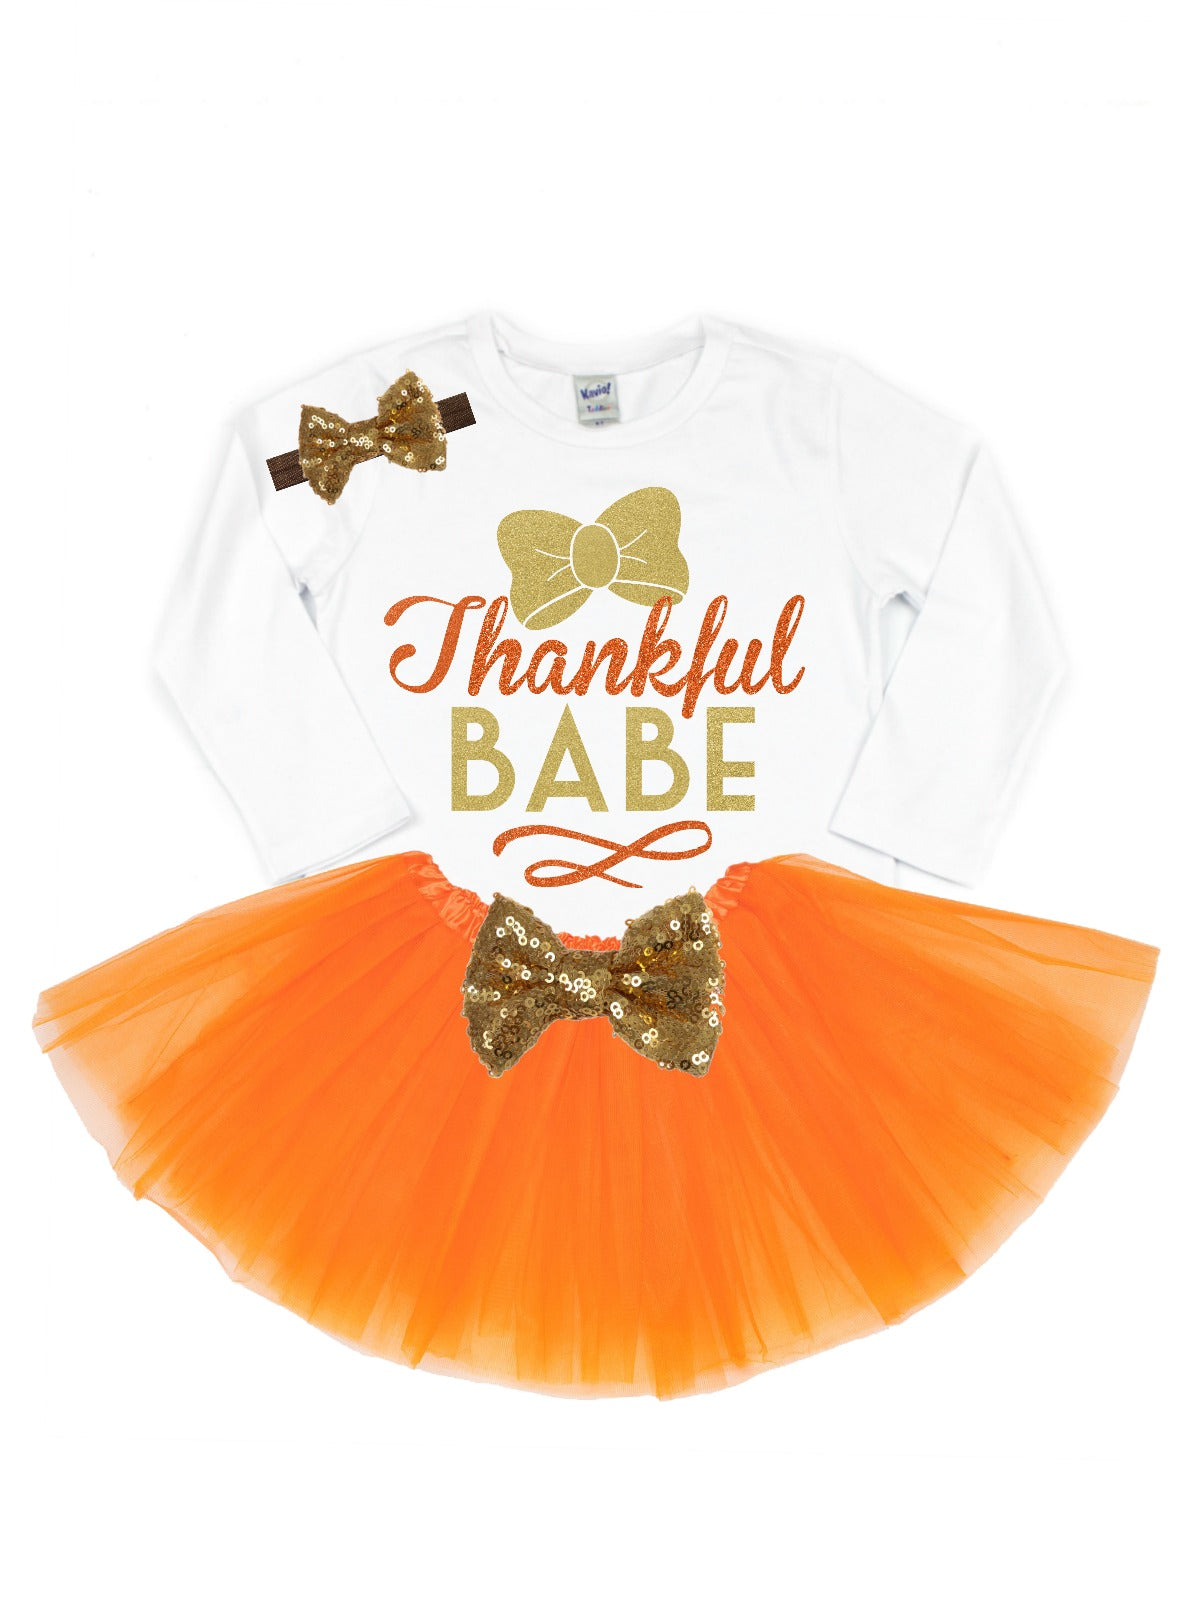 Thankful Babe Tutu Outfit for Thanksgiving